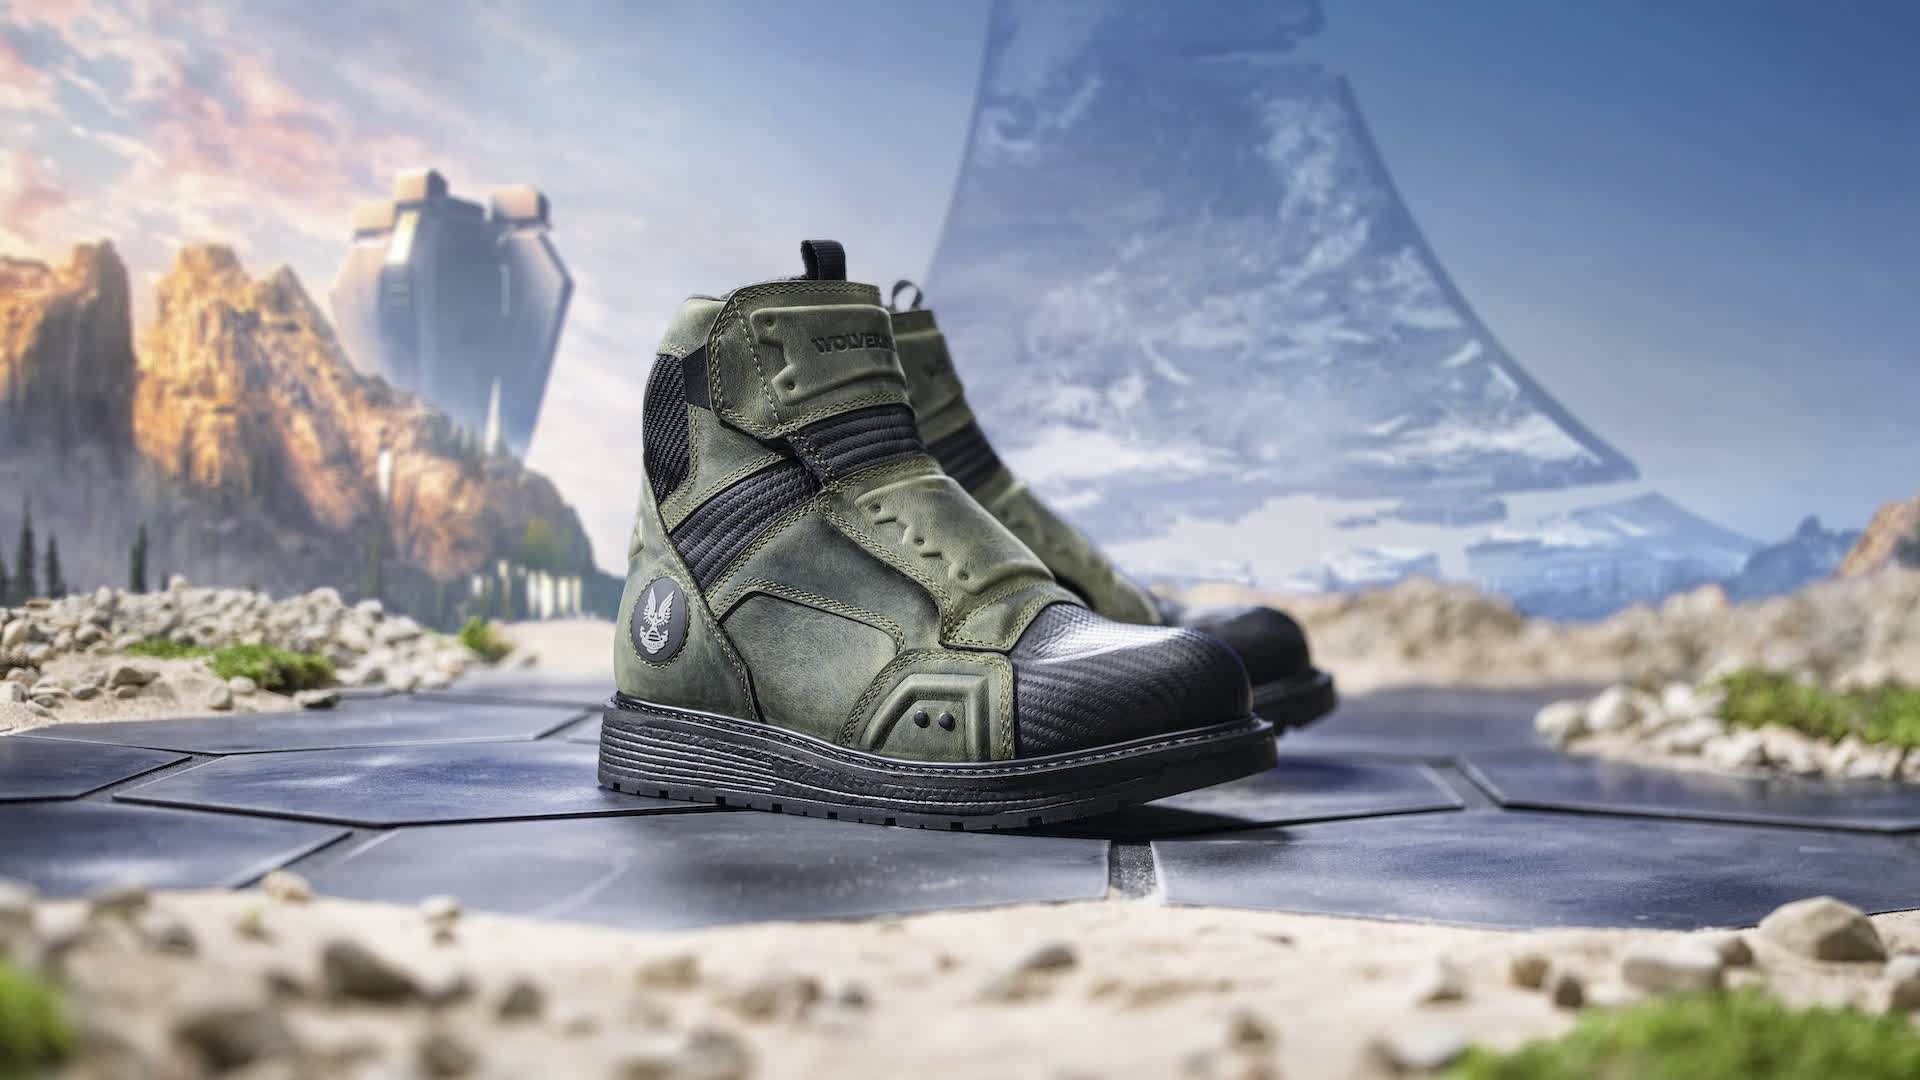 Wolverine's limited-edition Master Chief boots are for hardcore Halo fans